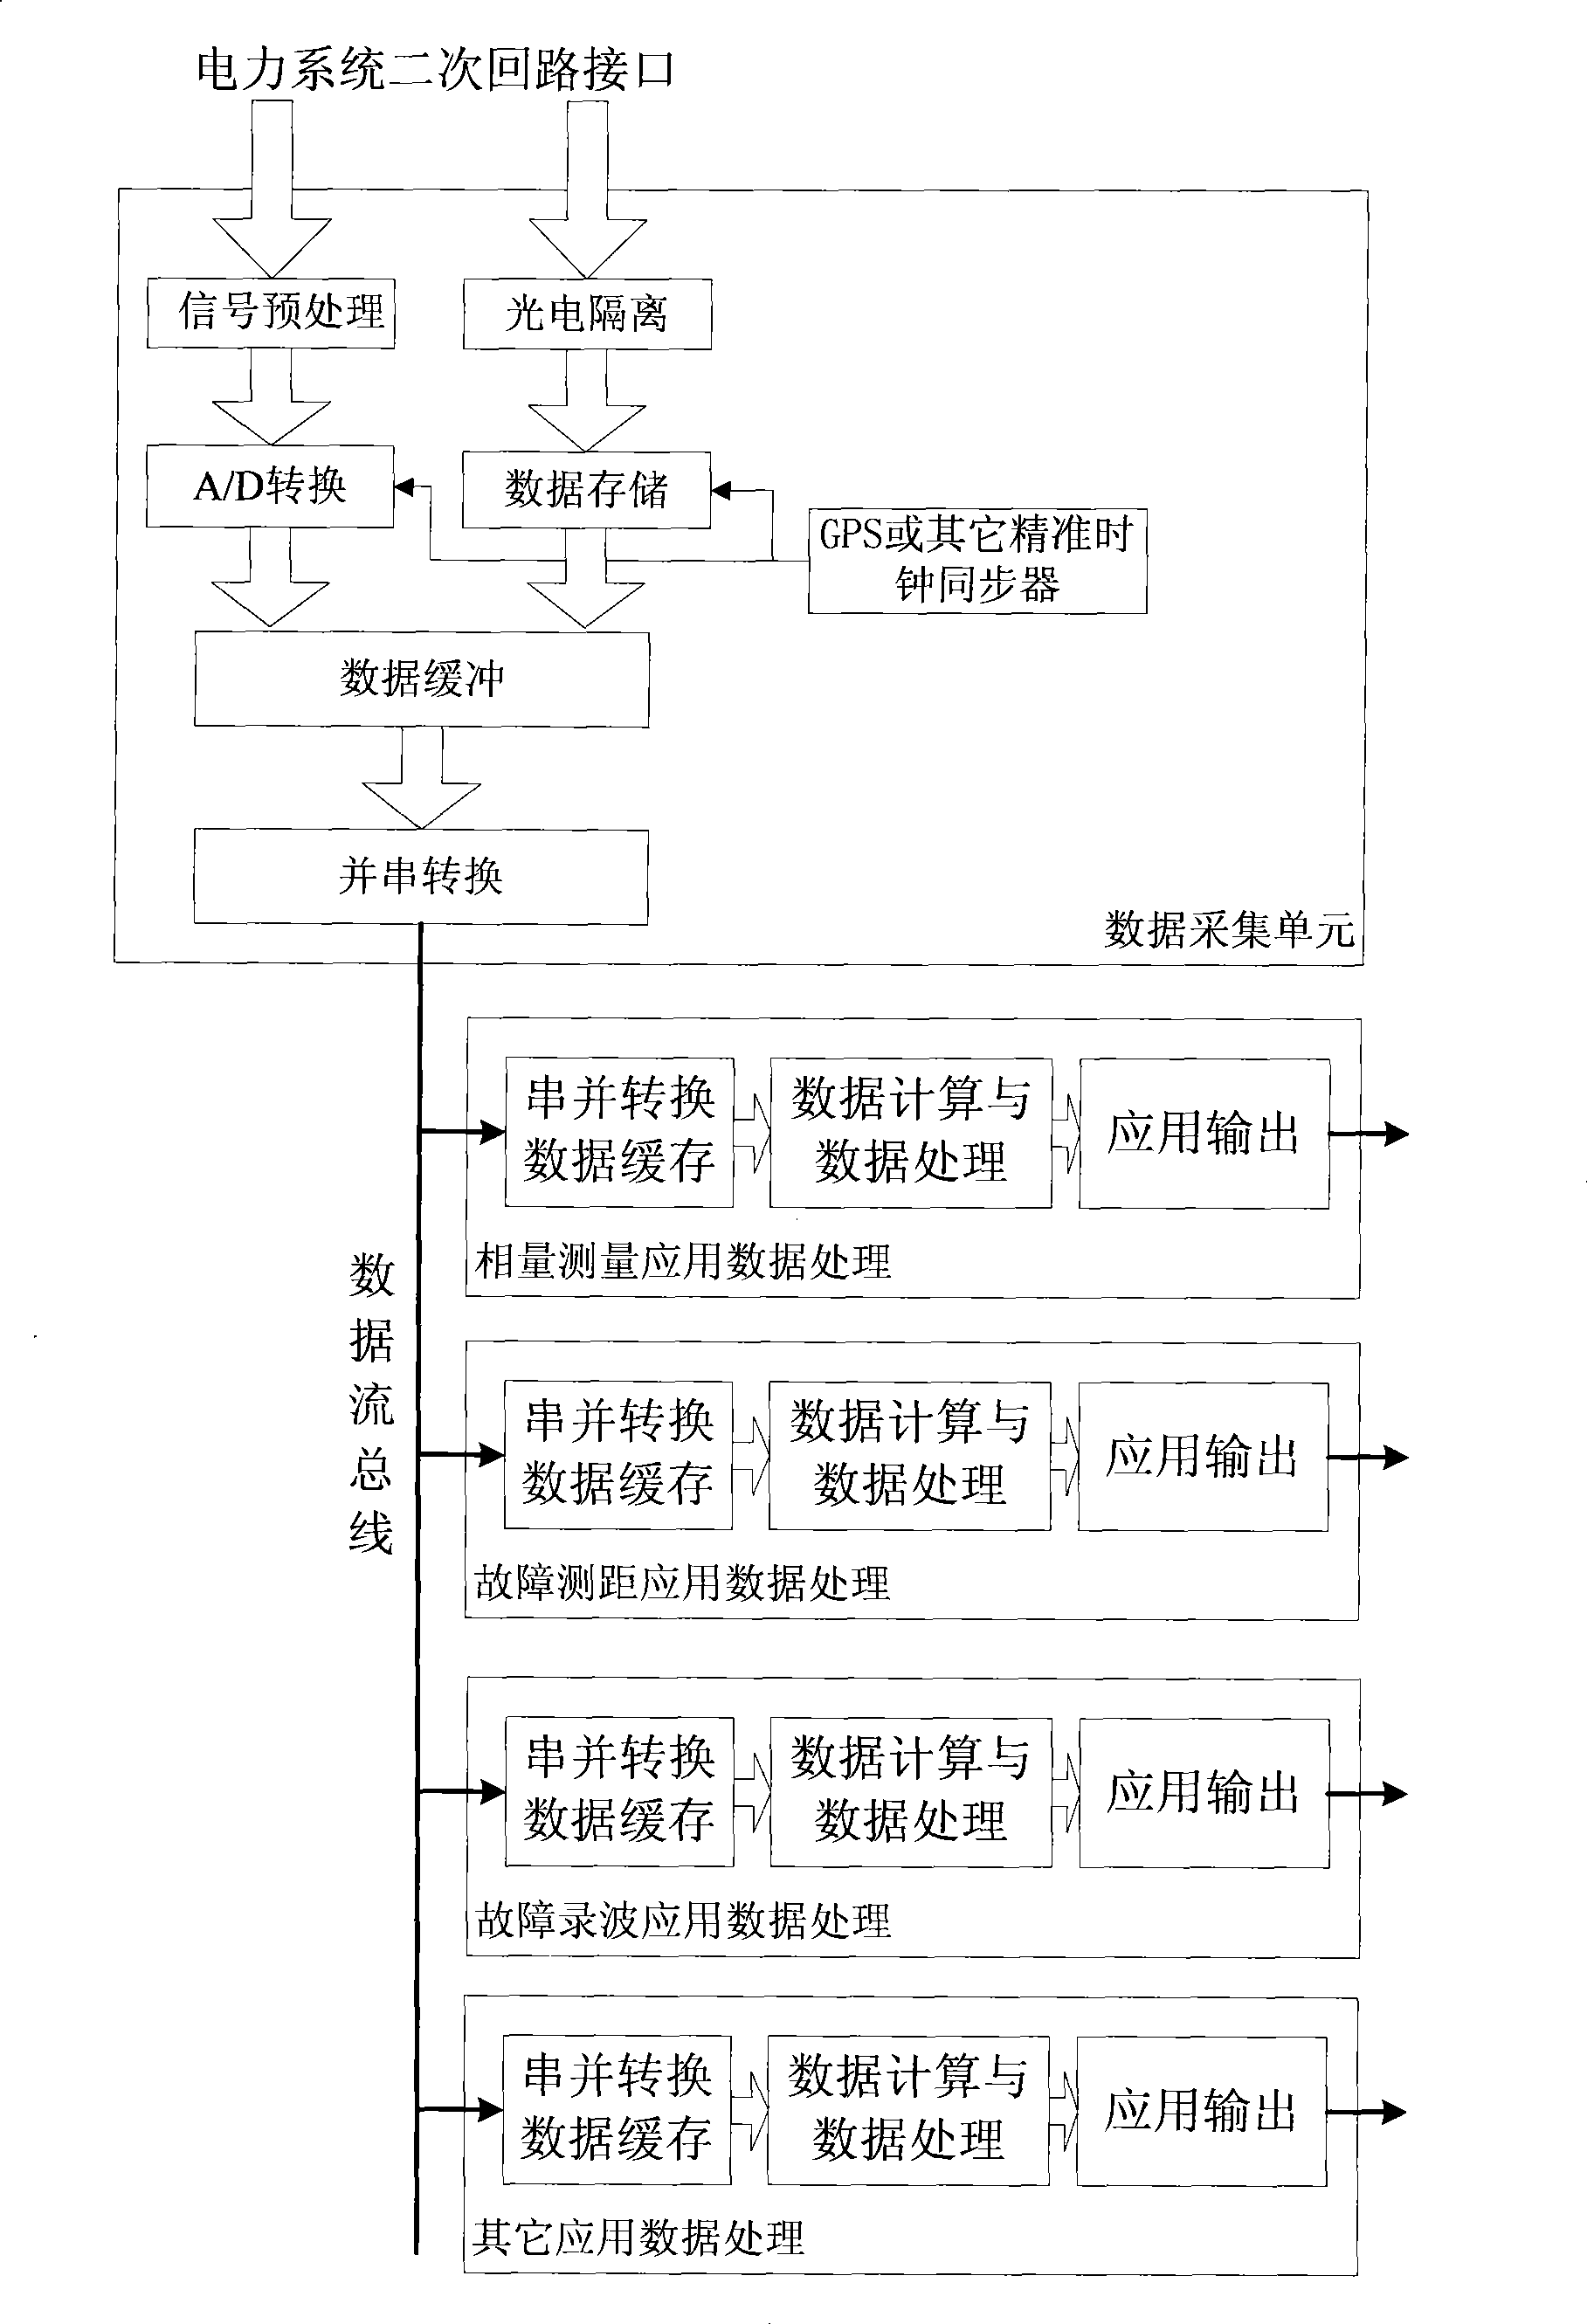 Distributed multifunctional integral measurement method for electric power system